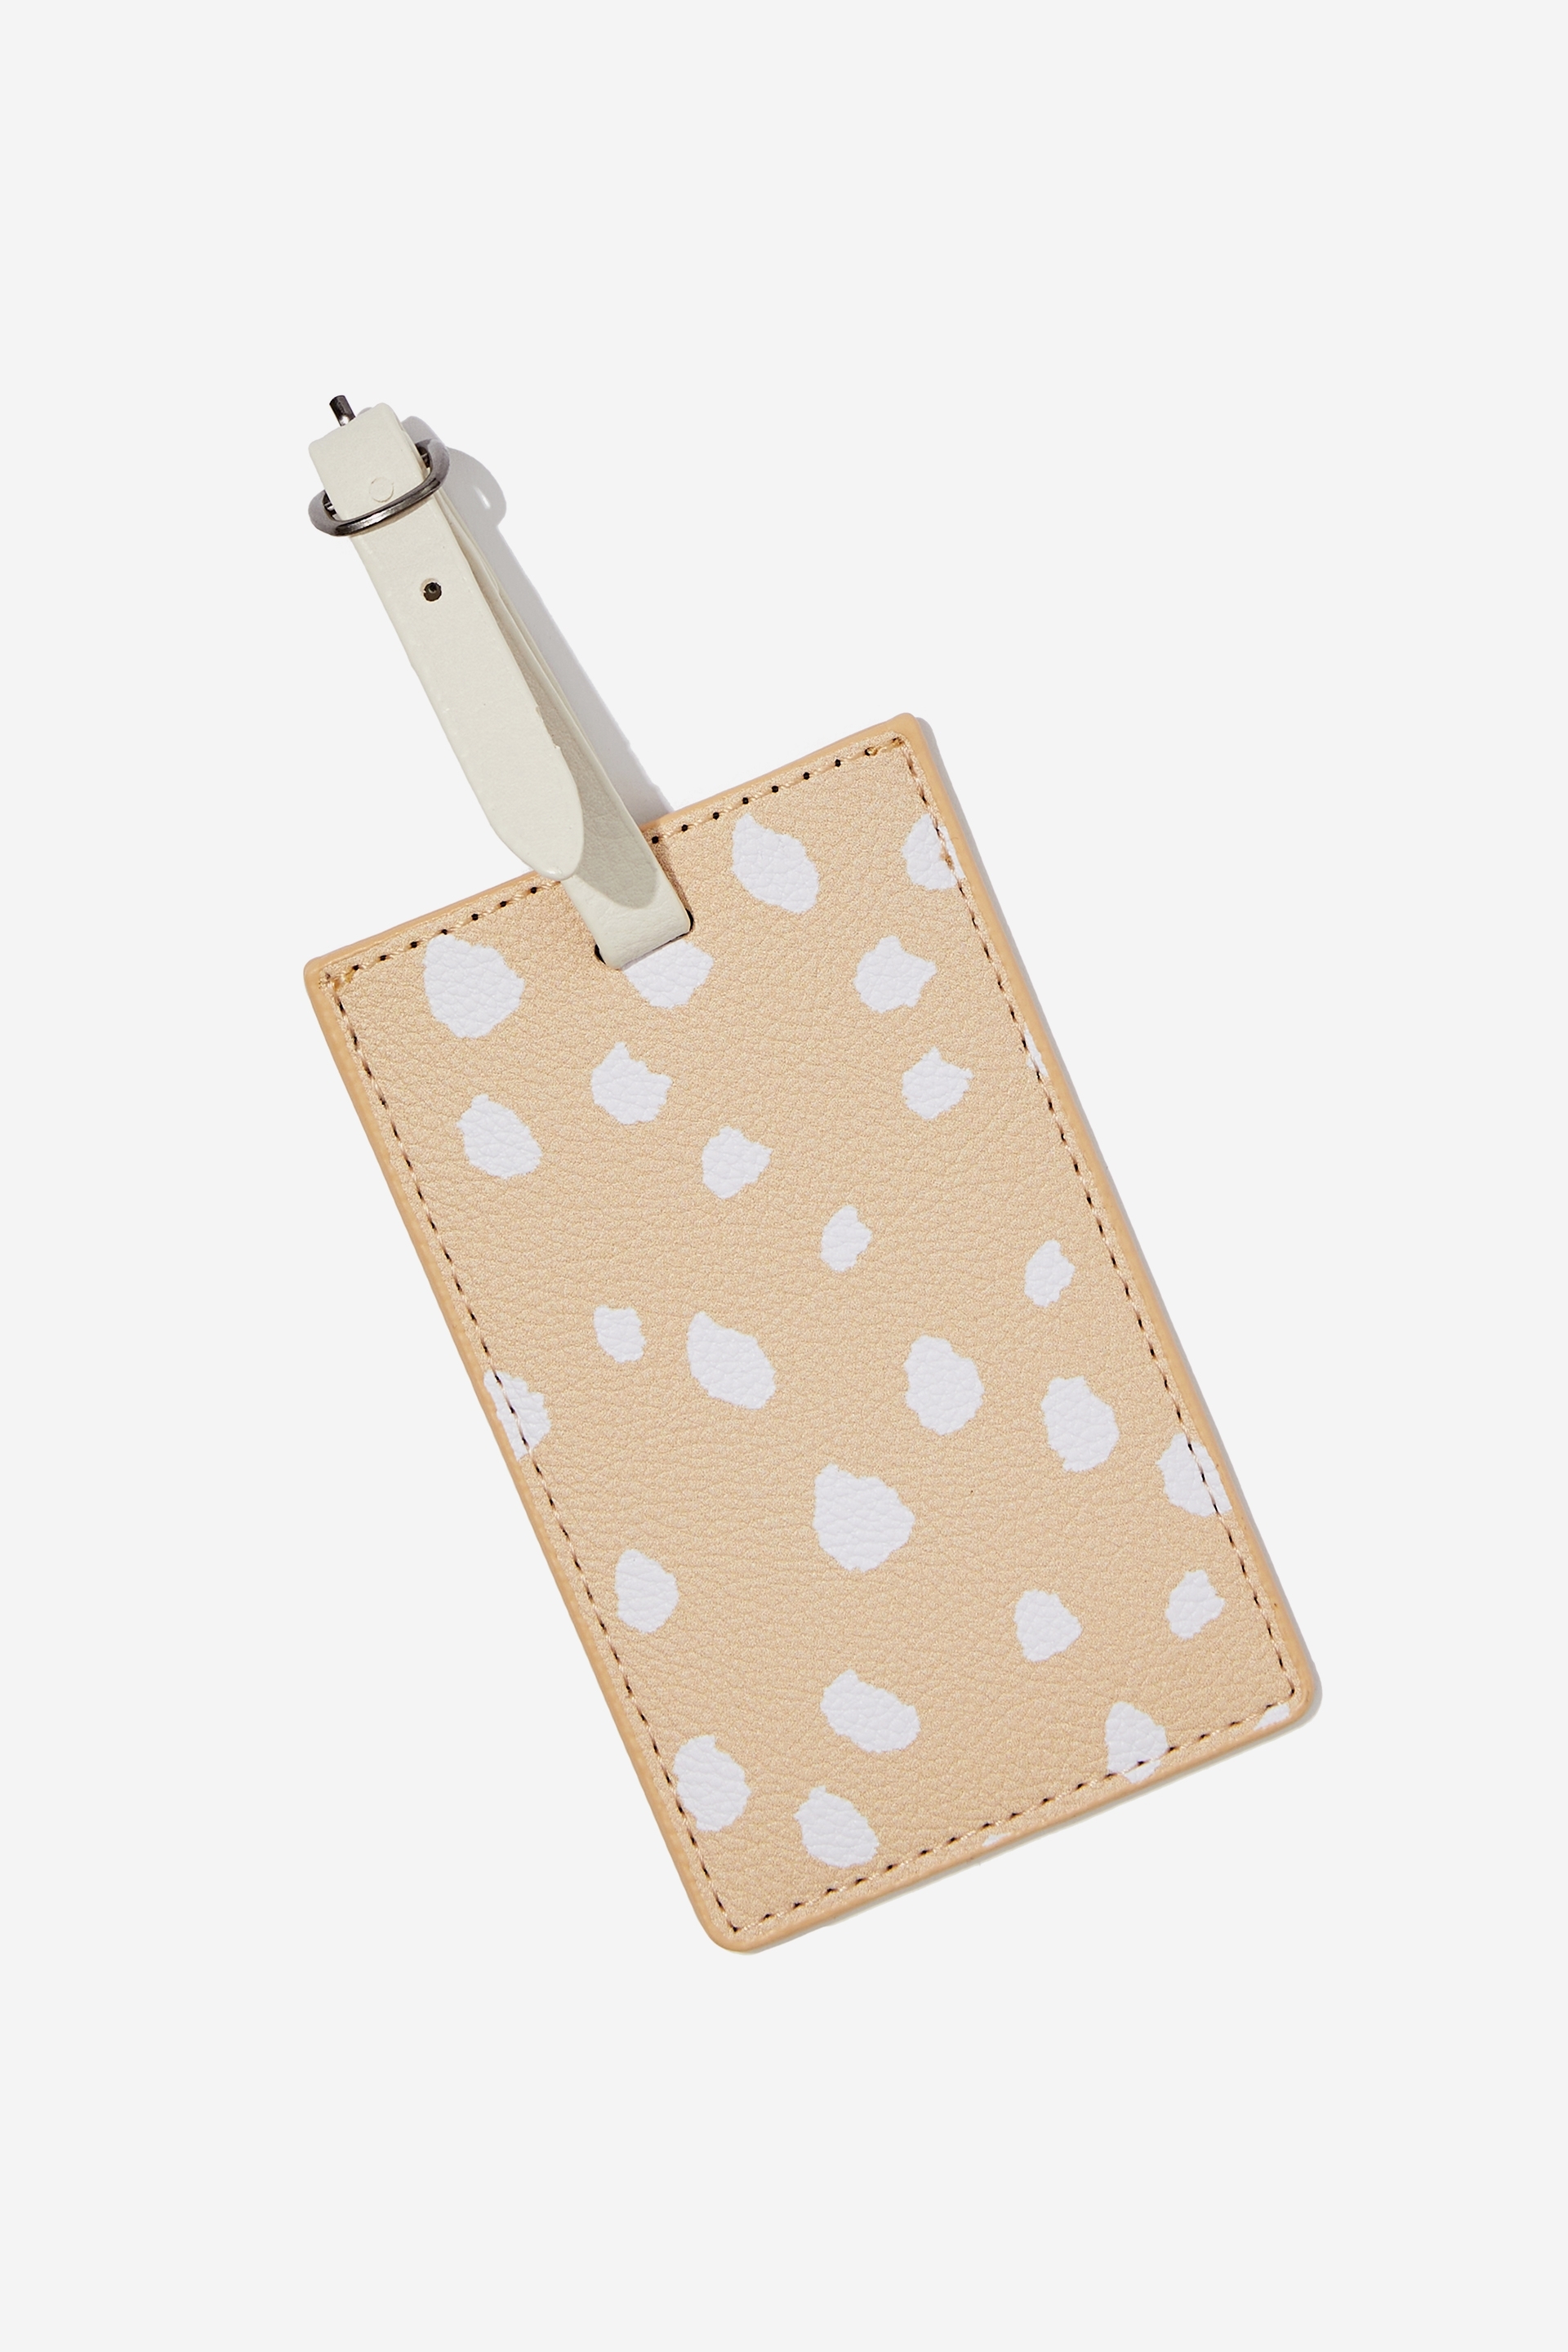 Typo - Off The Grid Luggage Tag - Spots / latte